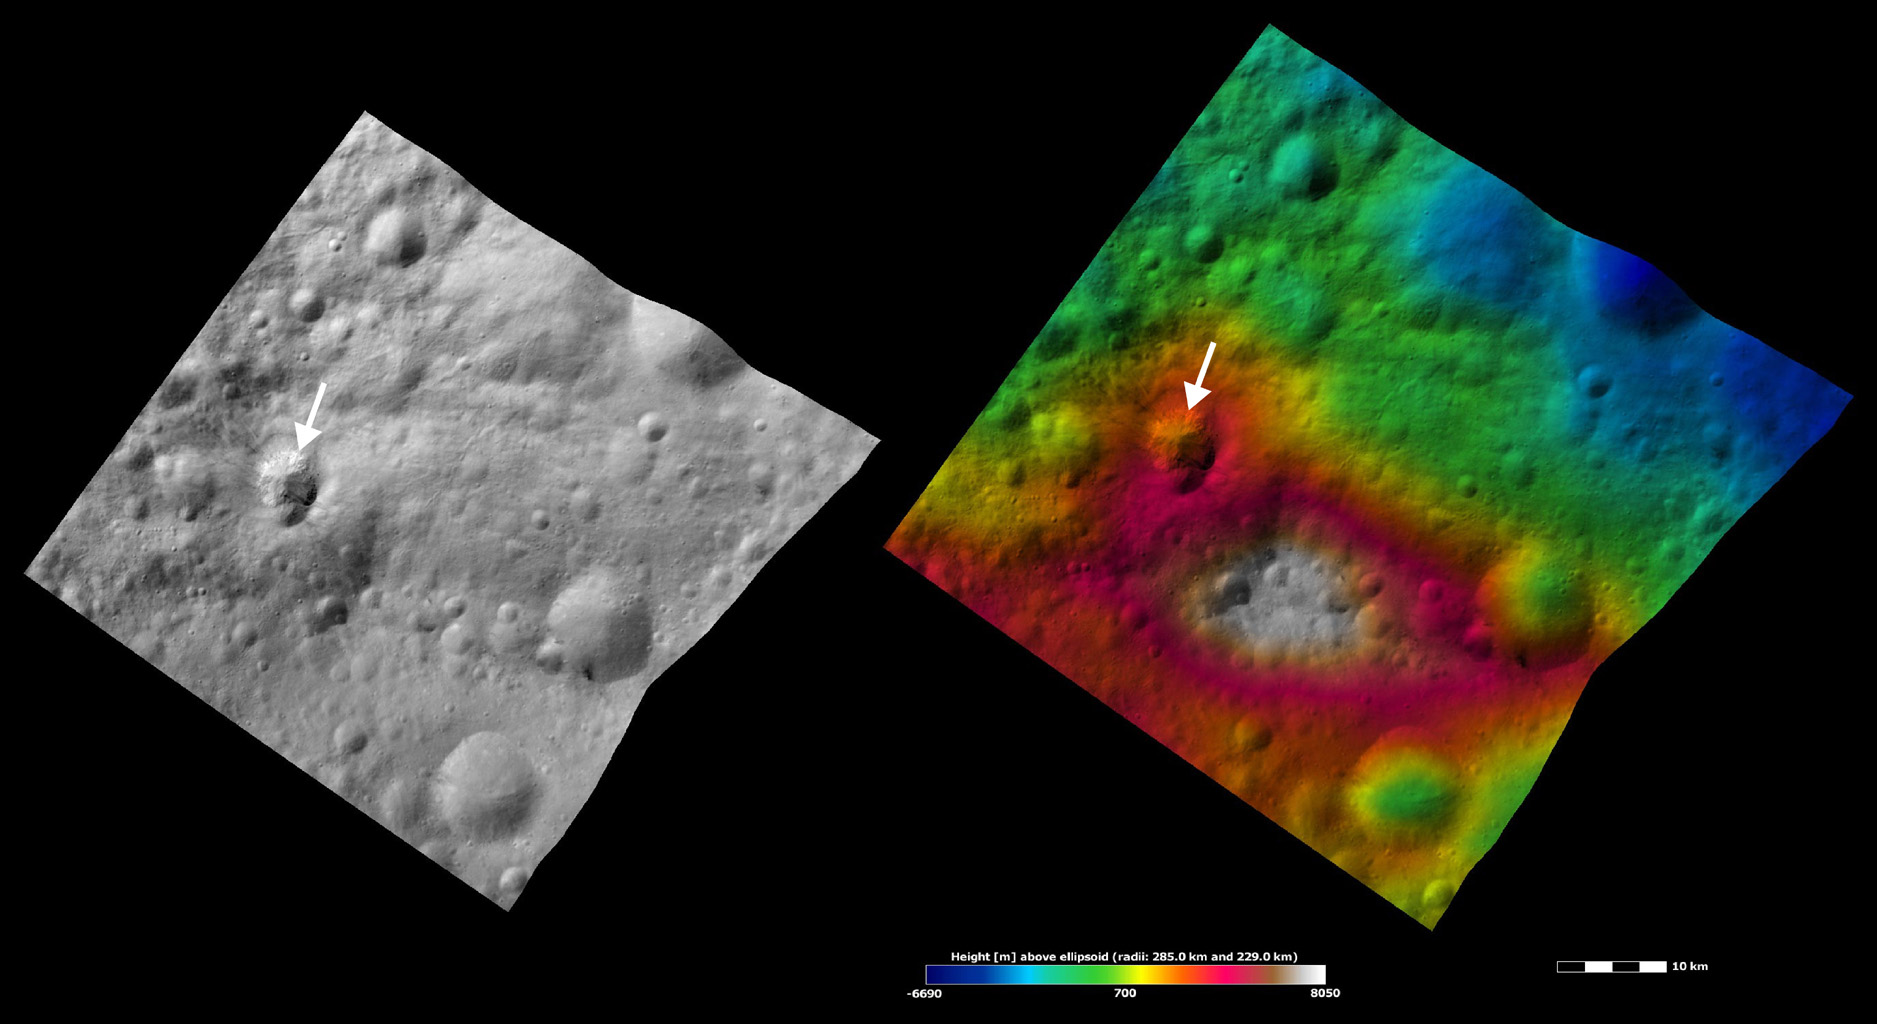 Apparent Brightness and Topography Images of Teia Crater